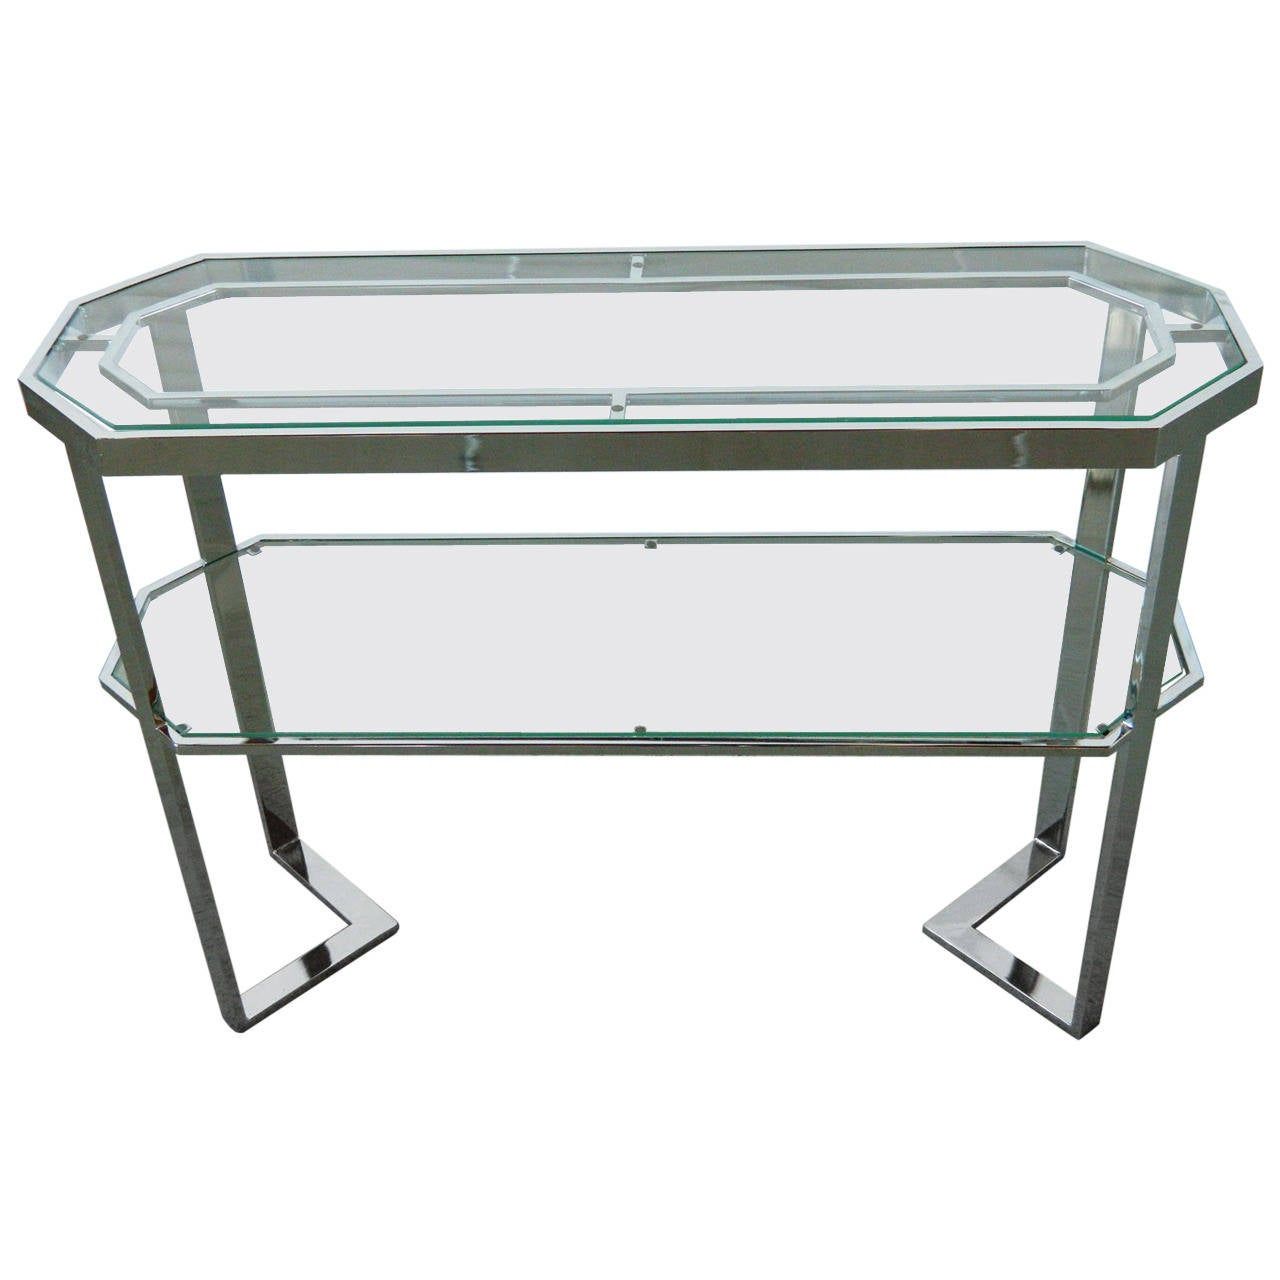 Chrome And Glass Console Table At 1stdibs Throughout Chrome And Glass Rectangular Console Tables (View 13 of 20)